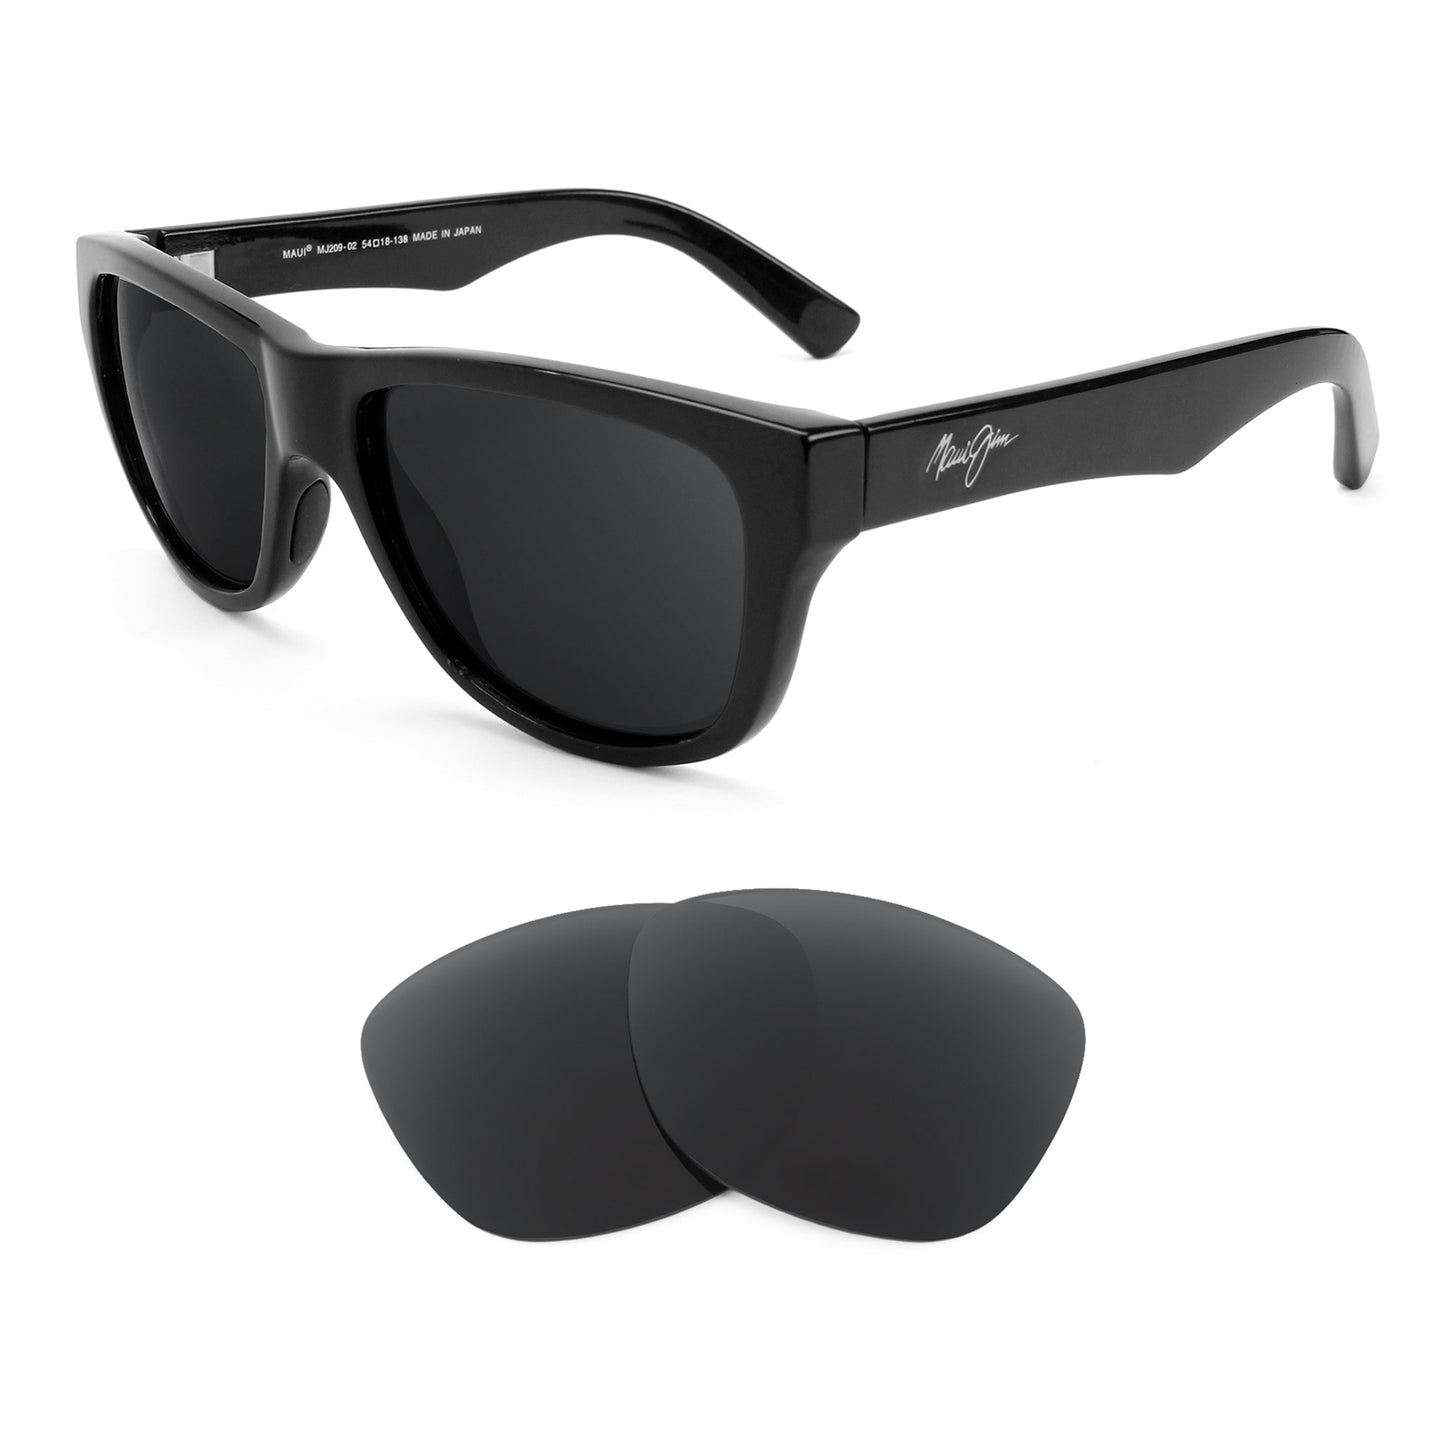 Maui Jim Cat III MJ209 sunglasses with replacement lenses